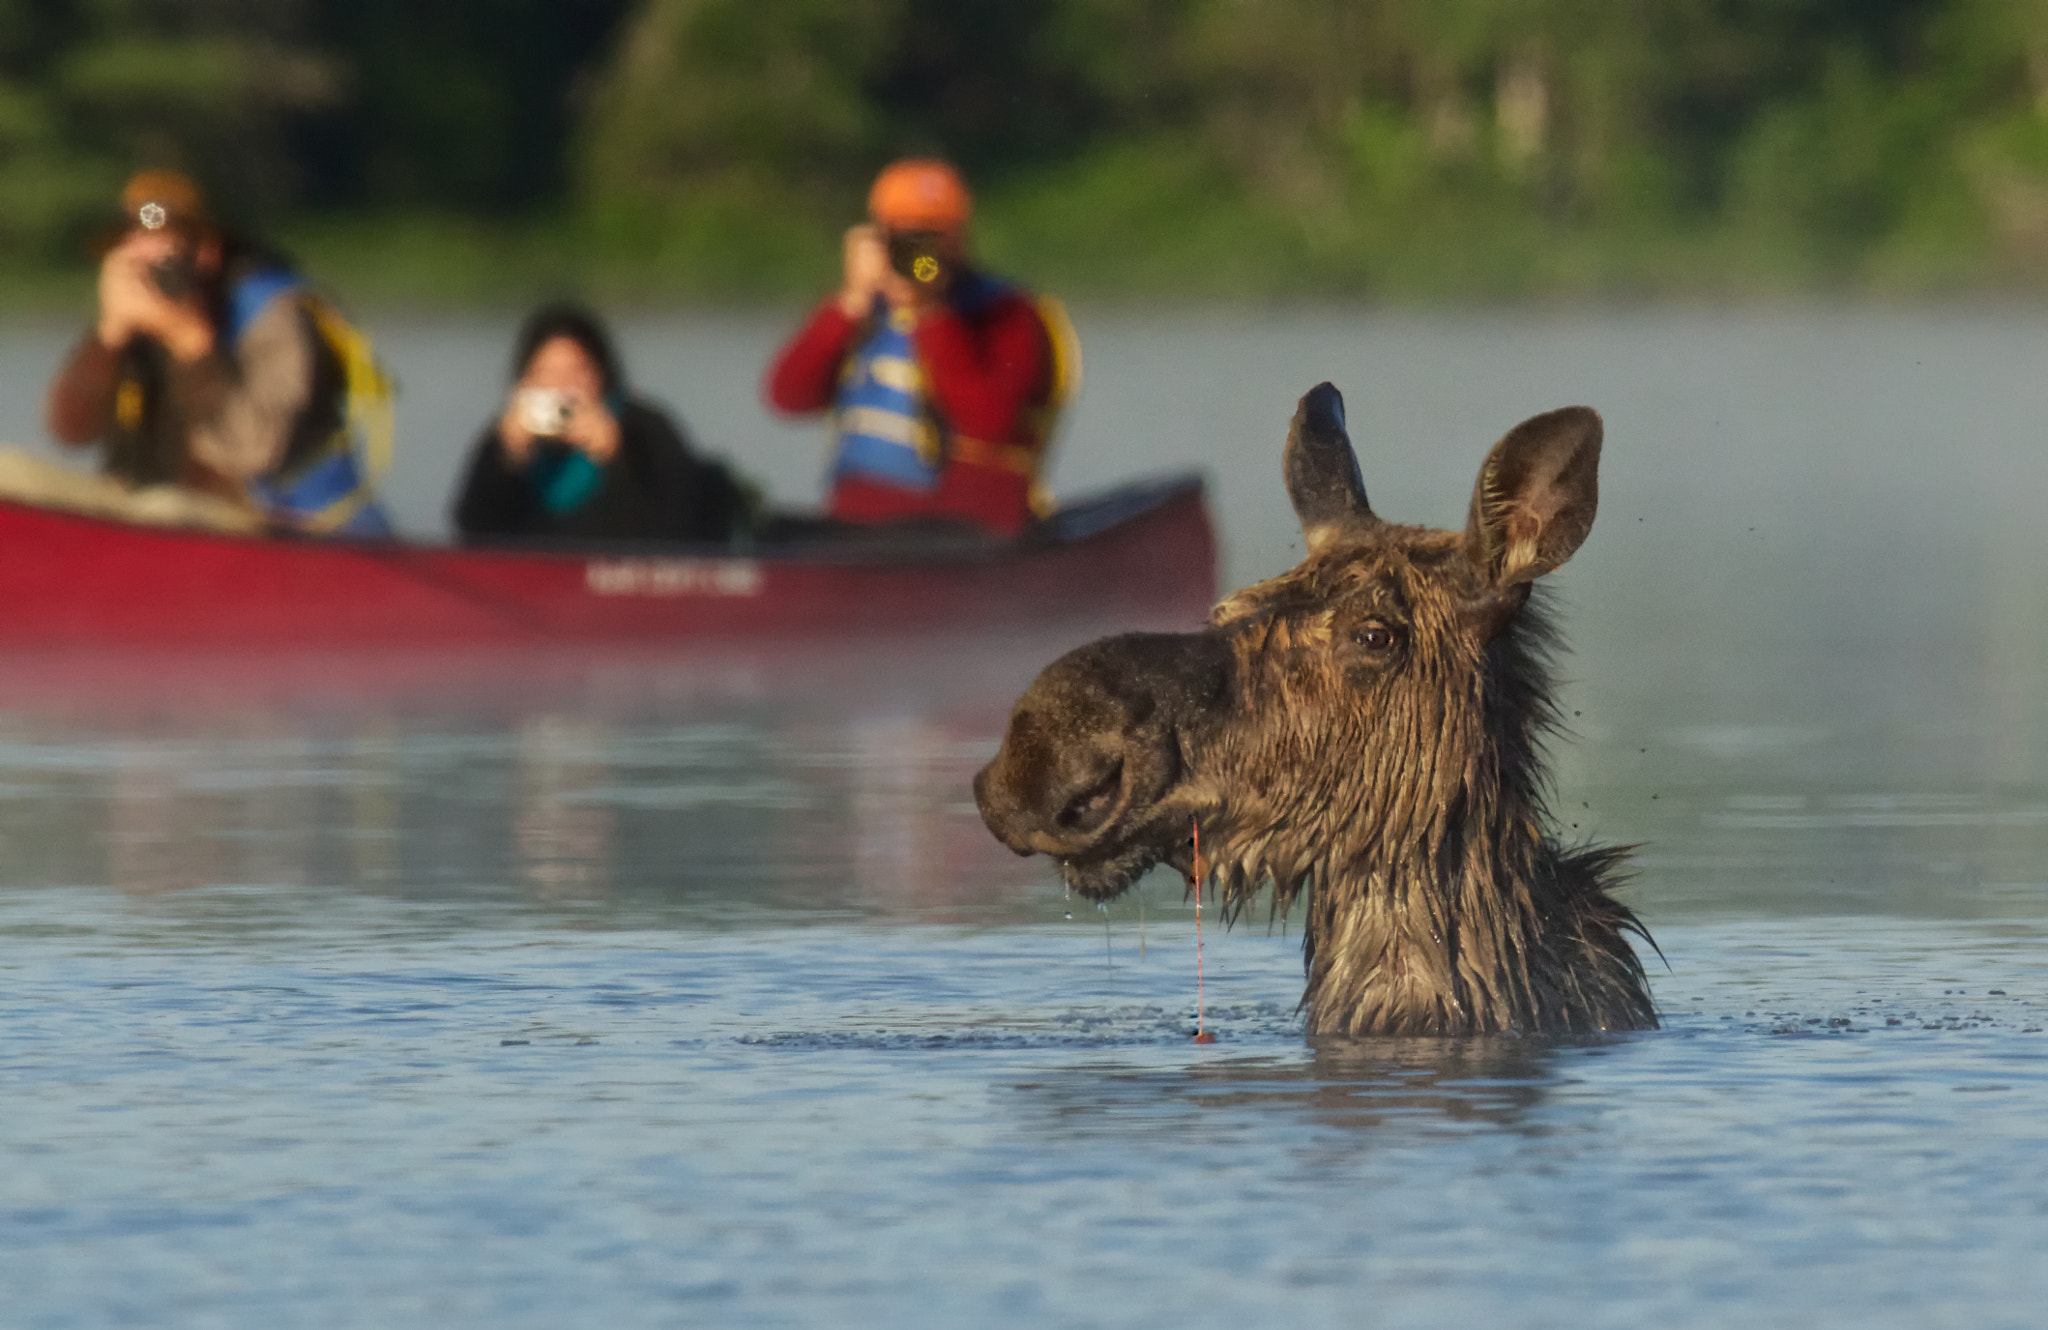 300mm F2.8 G sample photo. Paddling the back country of algonquin park in ont ... photography